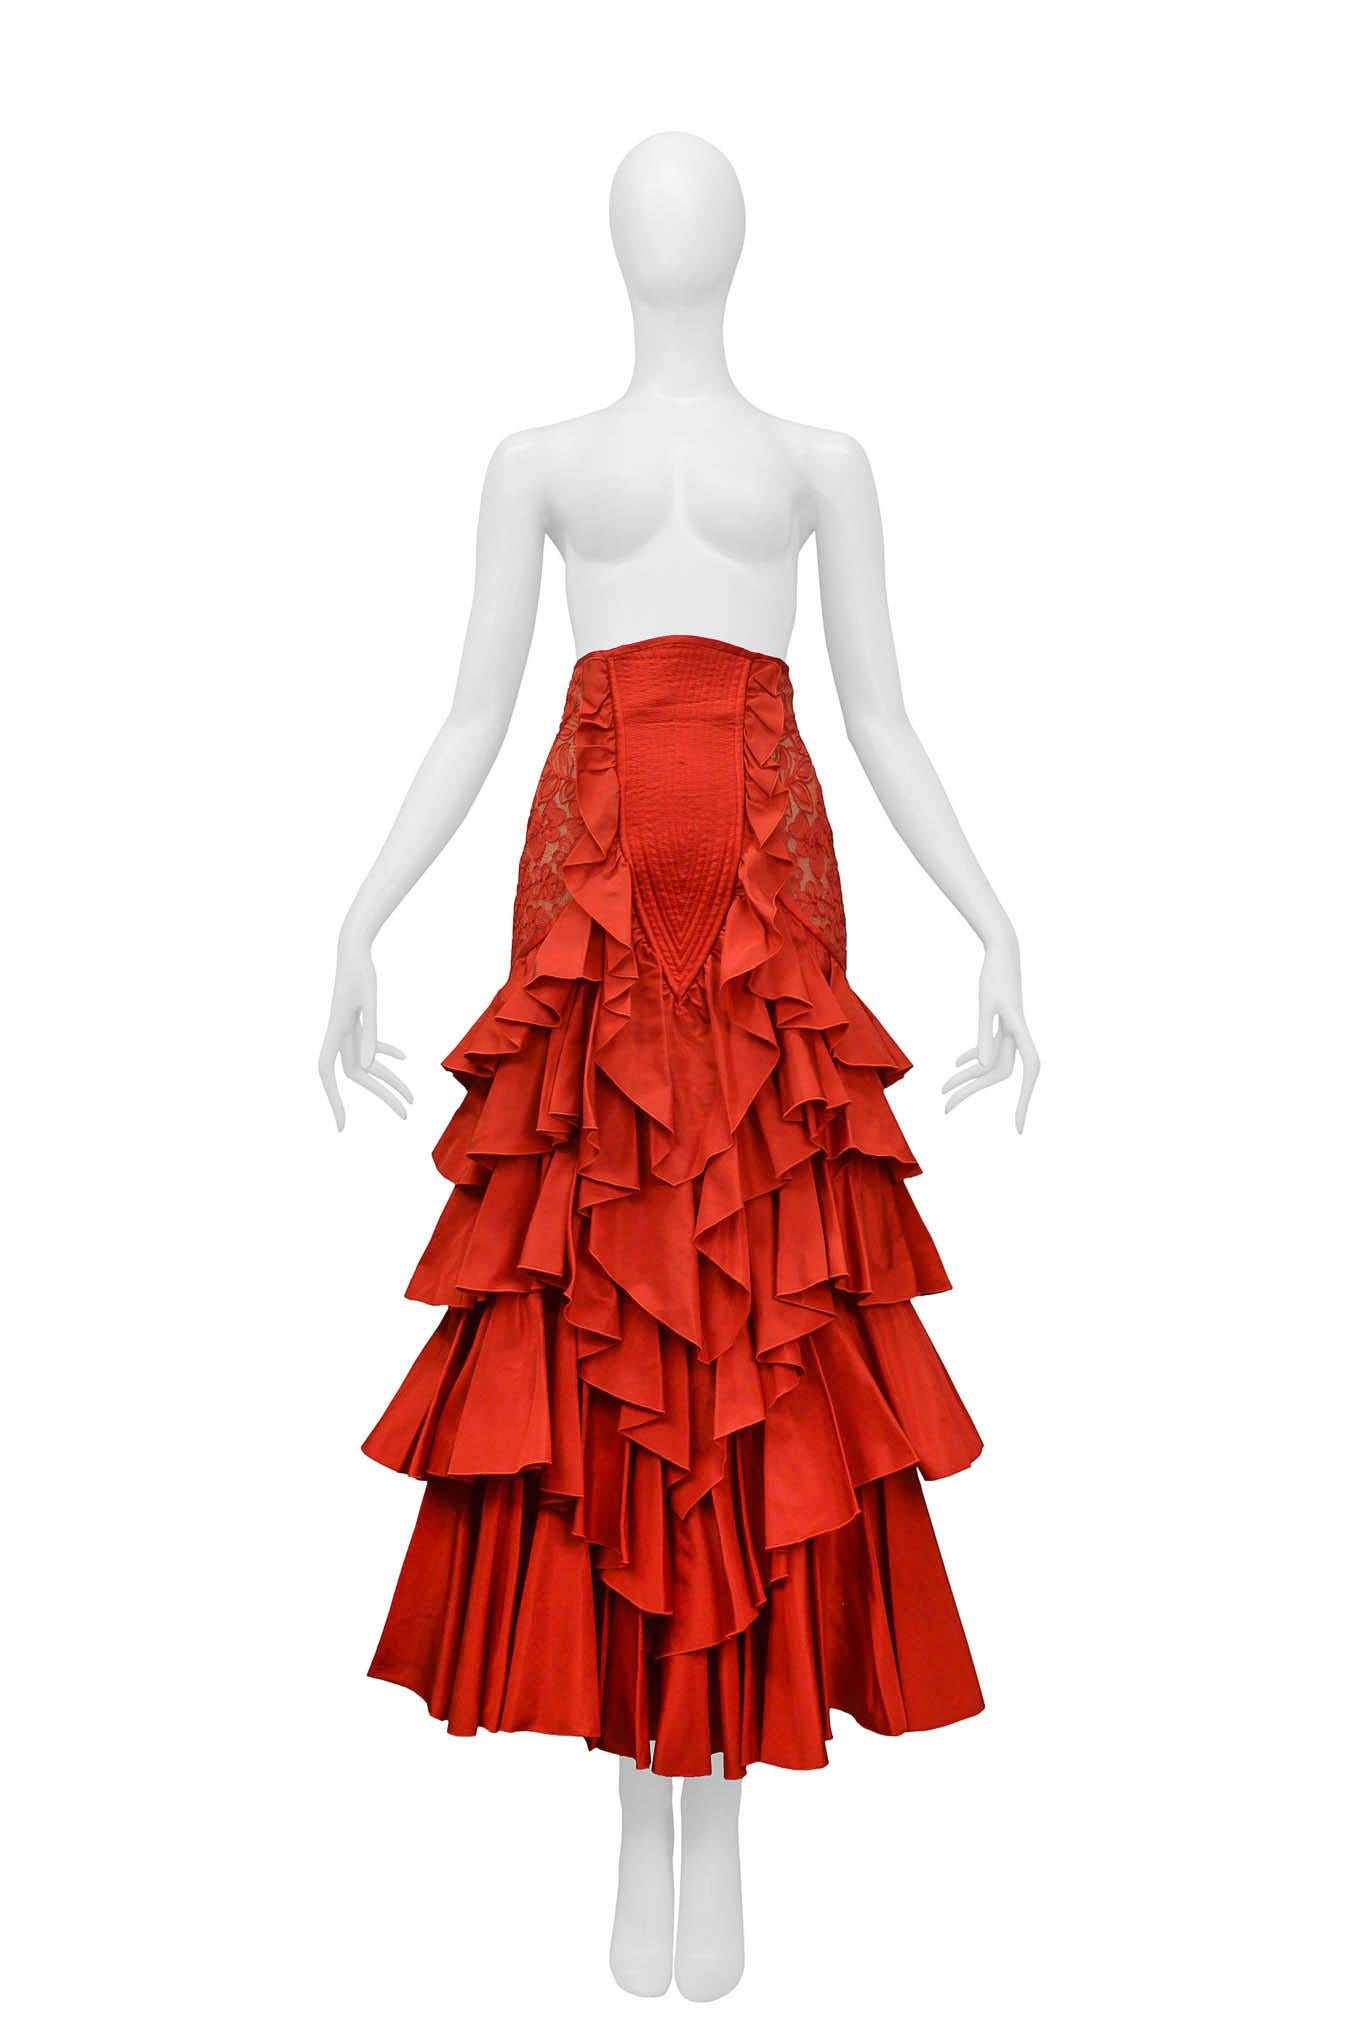 Resurrection Vintage is excited to offer a vintage Valentino red ball gown skirt featuring 5 tiers of ruffles, lace paneling on the sides, and a zipper at the center back

Valentino
Size 6
100% Nylon
Excellent Vintage Condition 
Authenticity